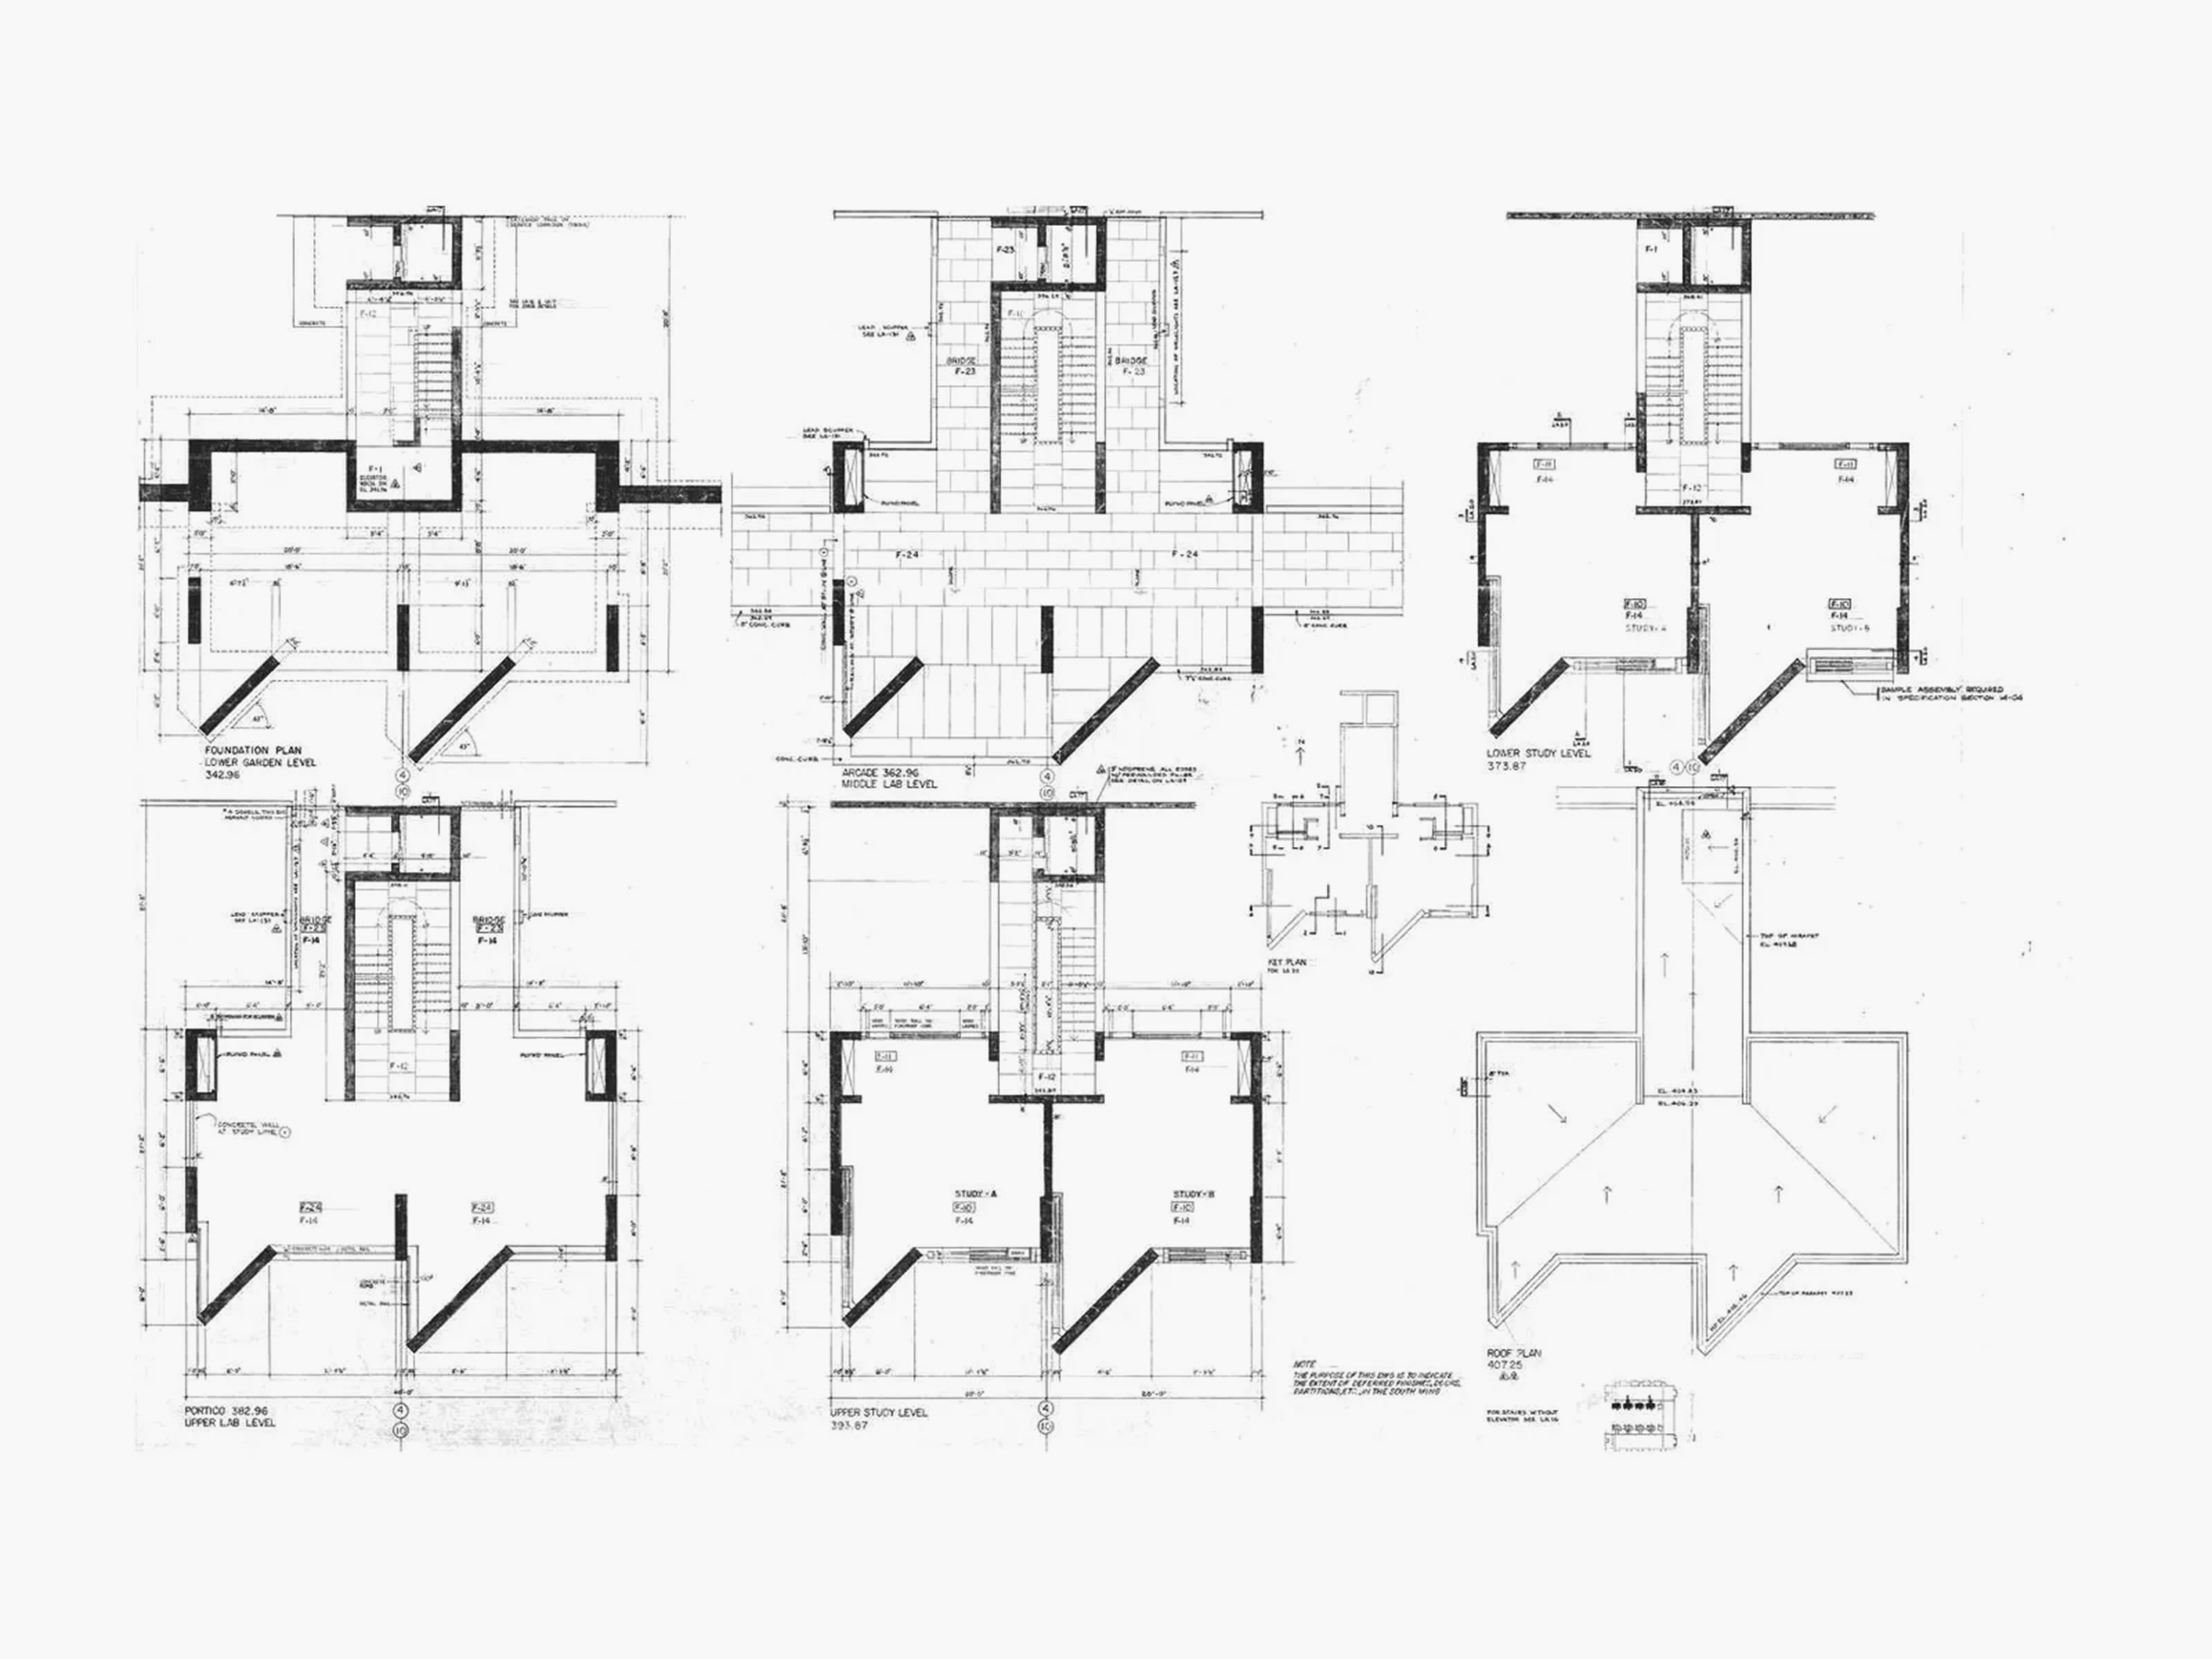 Plans of the Studies rooms of the Salk Institute in La Jolla, California, a building by Louis Kahn, 1965